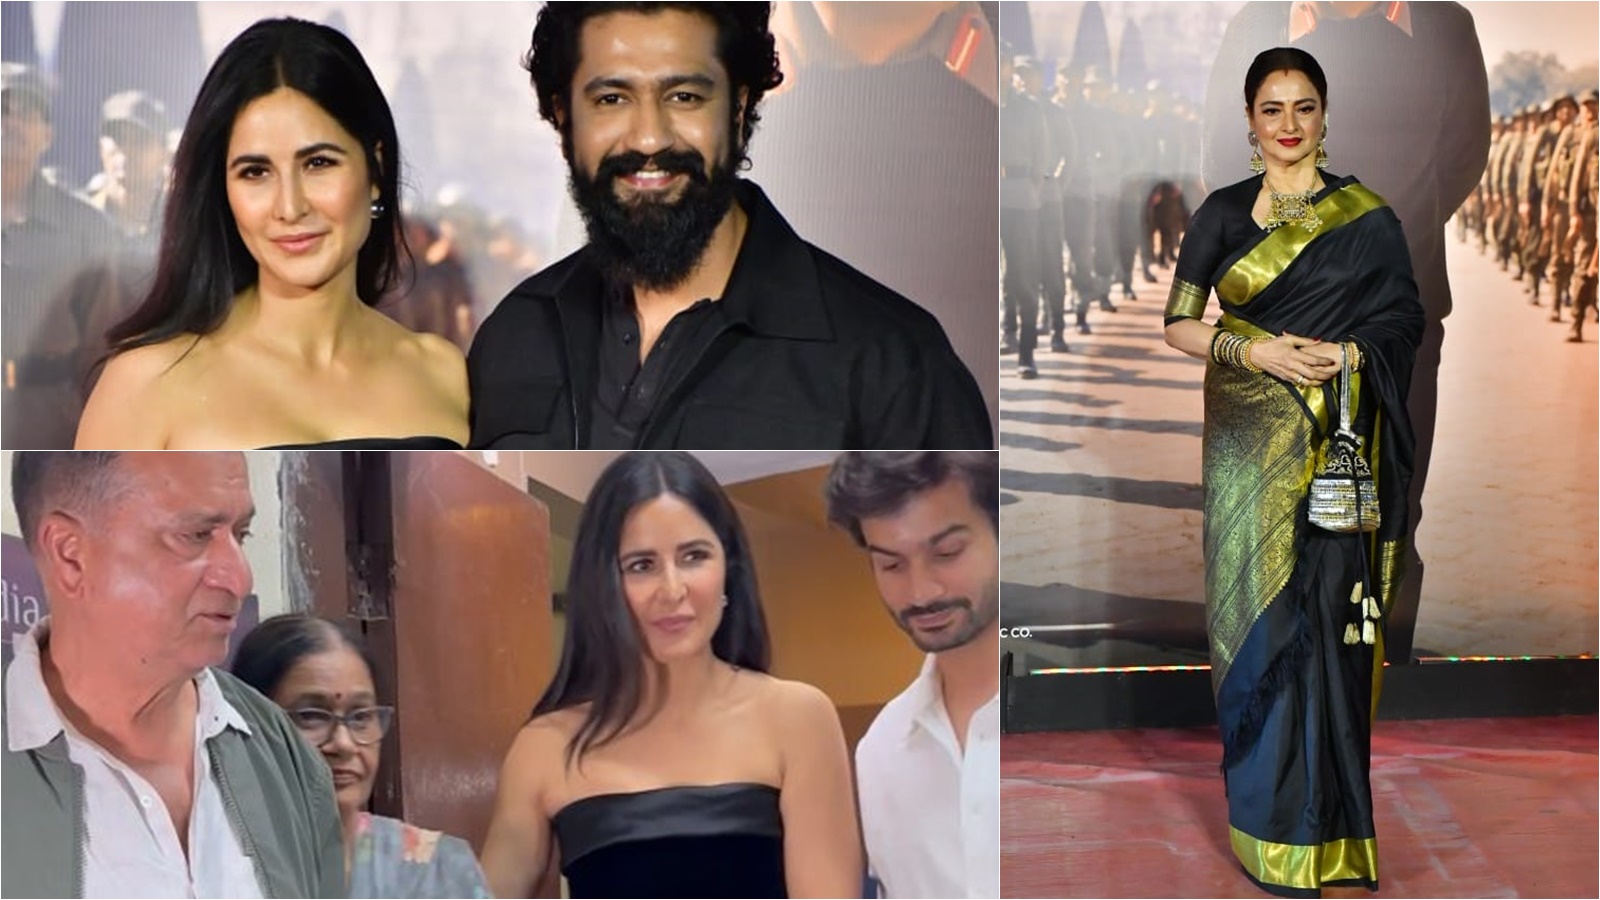 Xxx Katrina Kyap Video - Doting daughter-in-law Katrina Kaif tends to Vicky Kaushal's parents, Rekha  salutes Sam Bahadur poster. See photos and videos from premiere event |  Bollywood News - The Indian Express